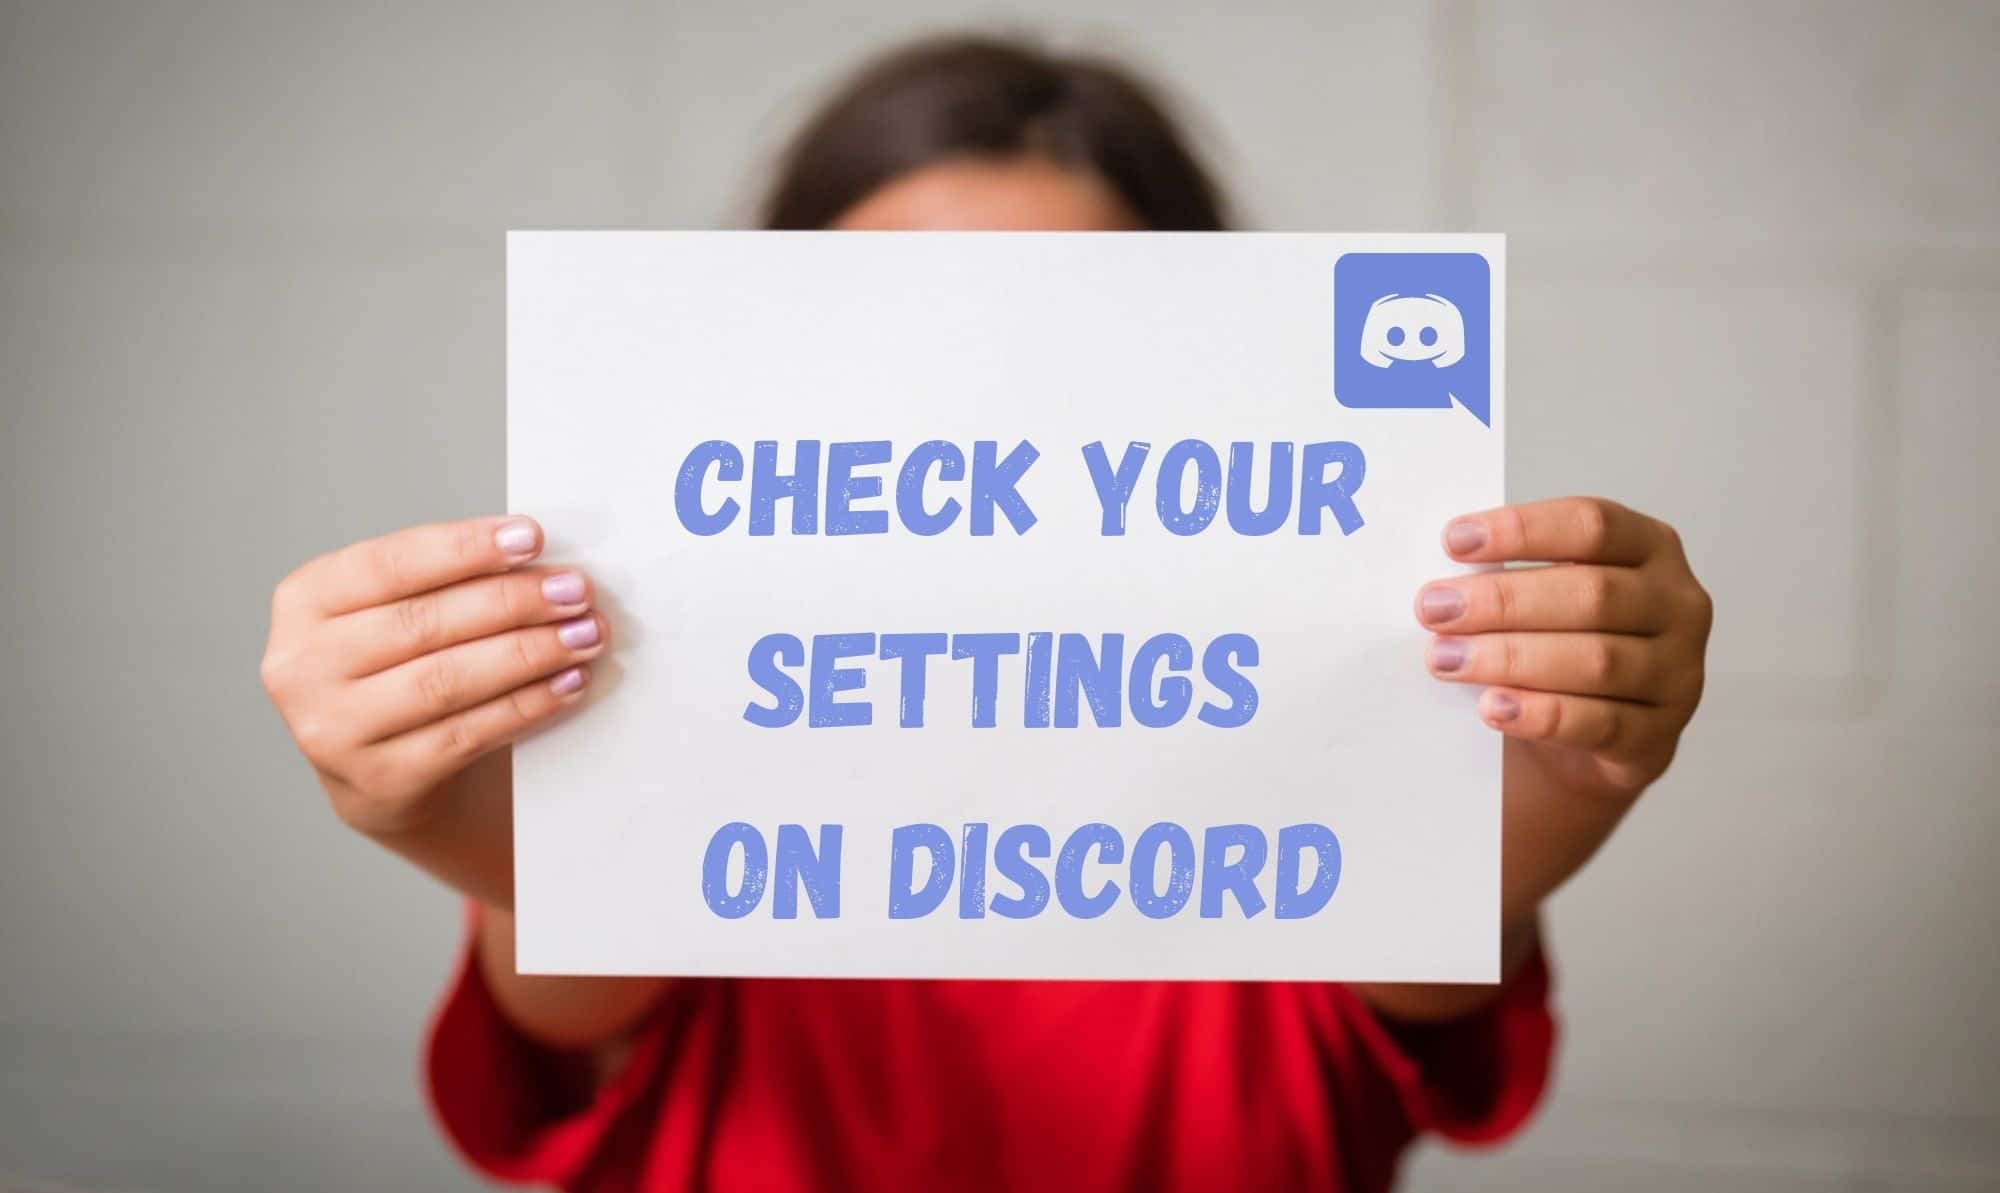 Check your Settings on Discord